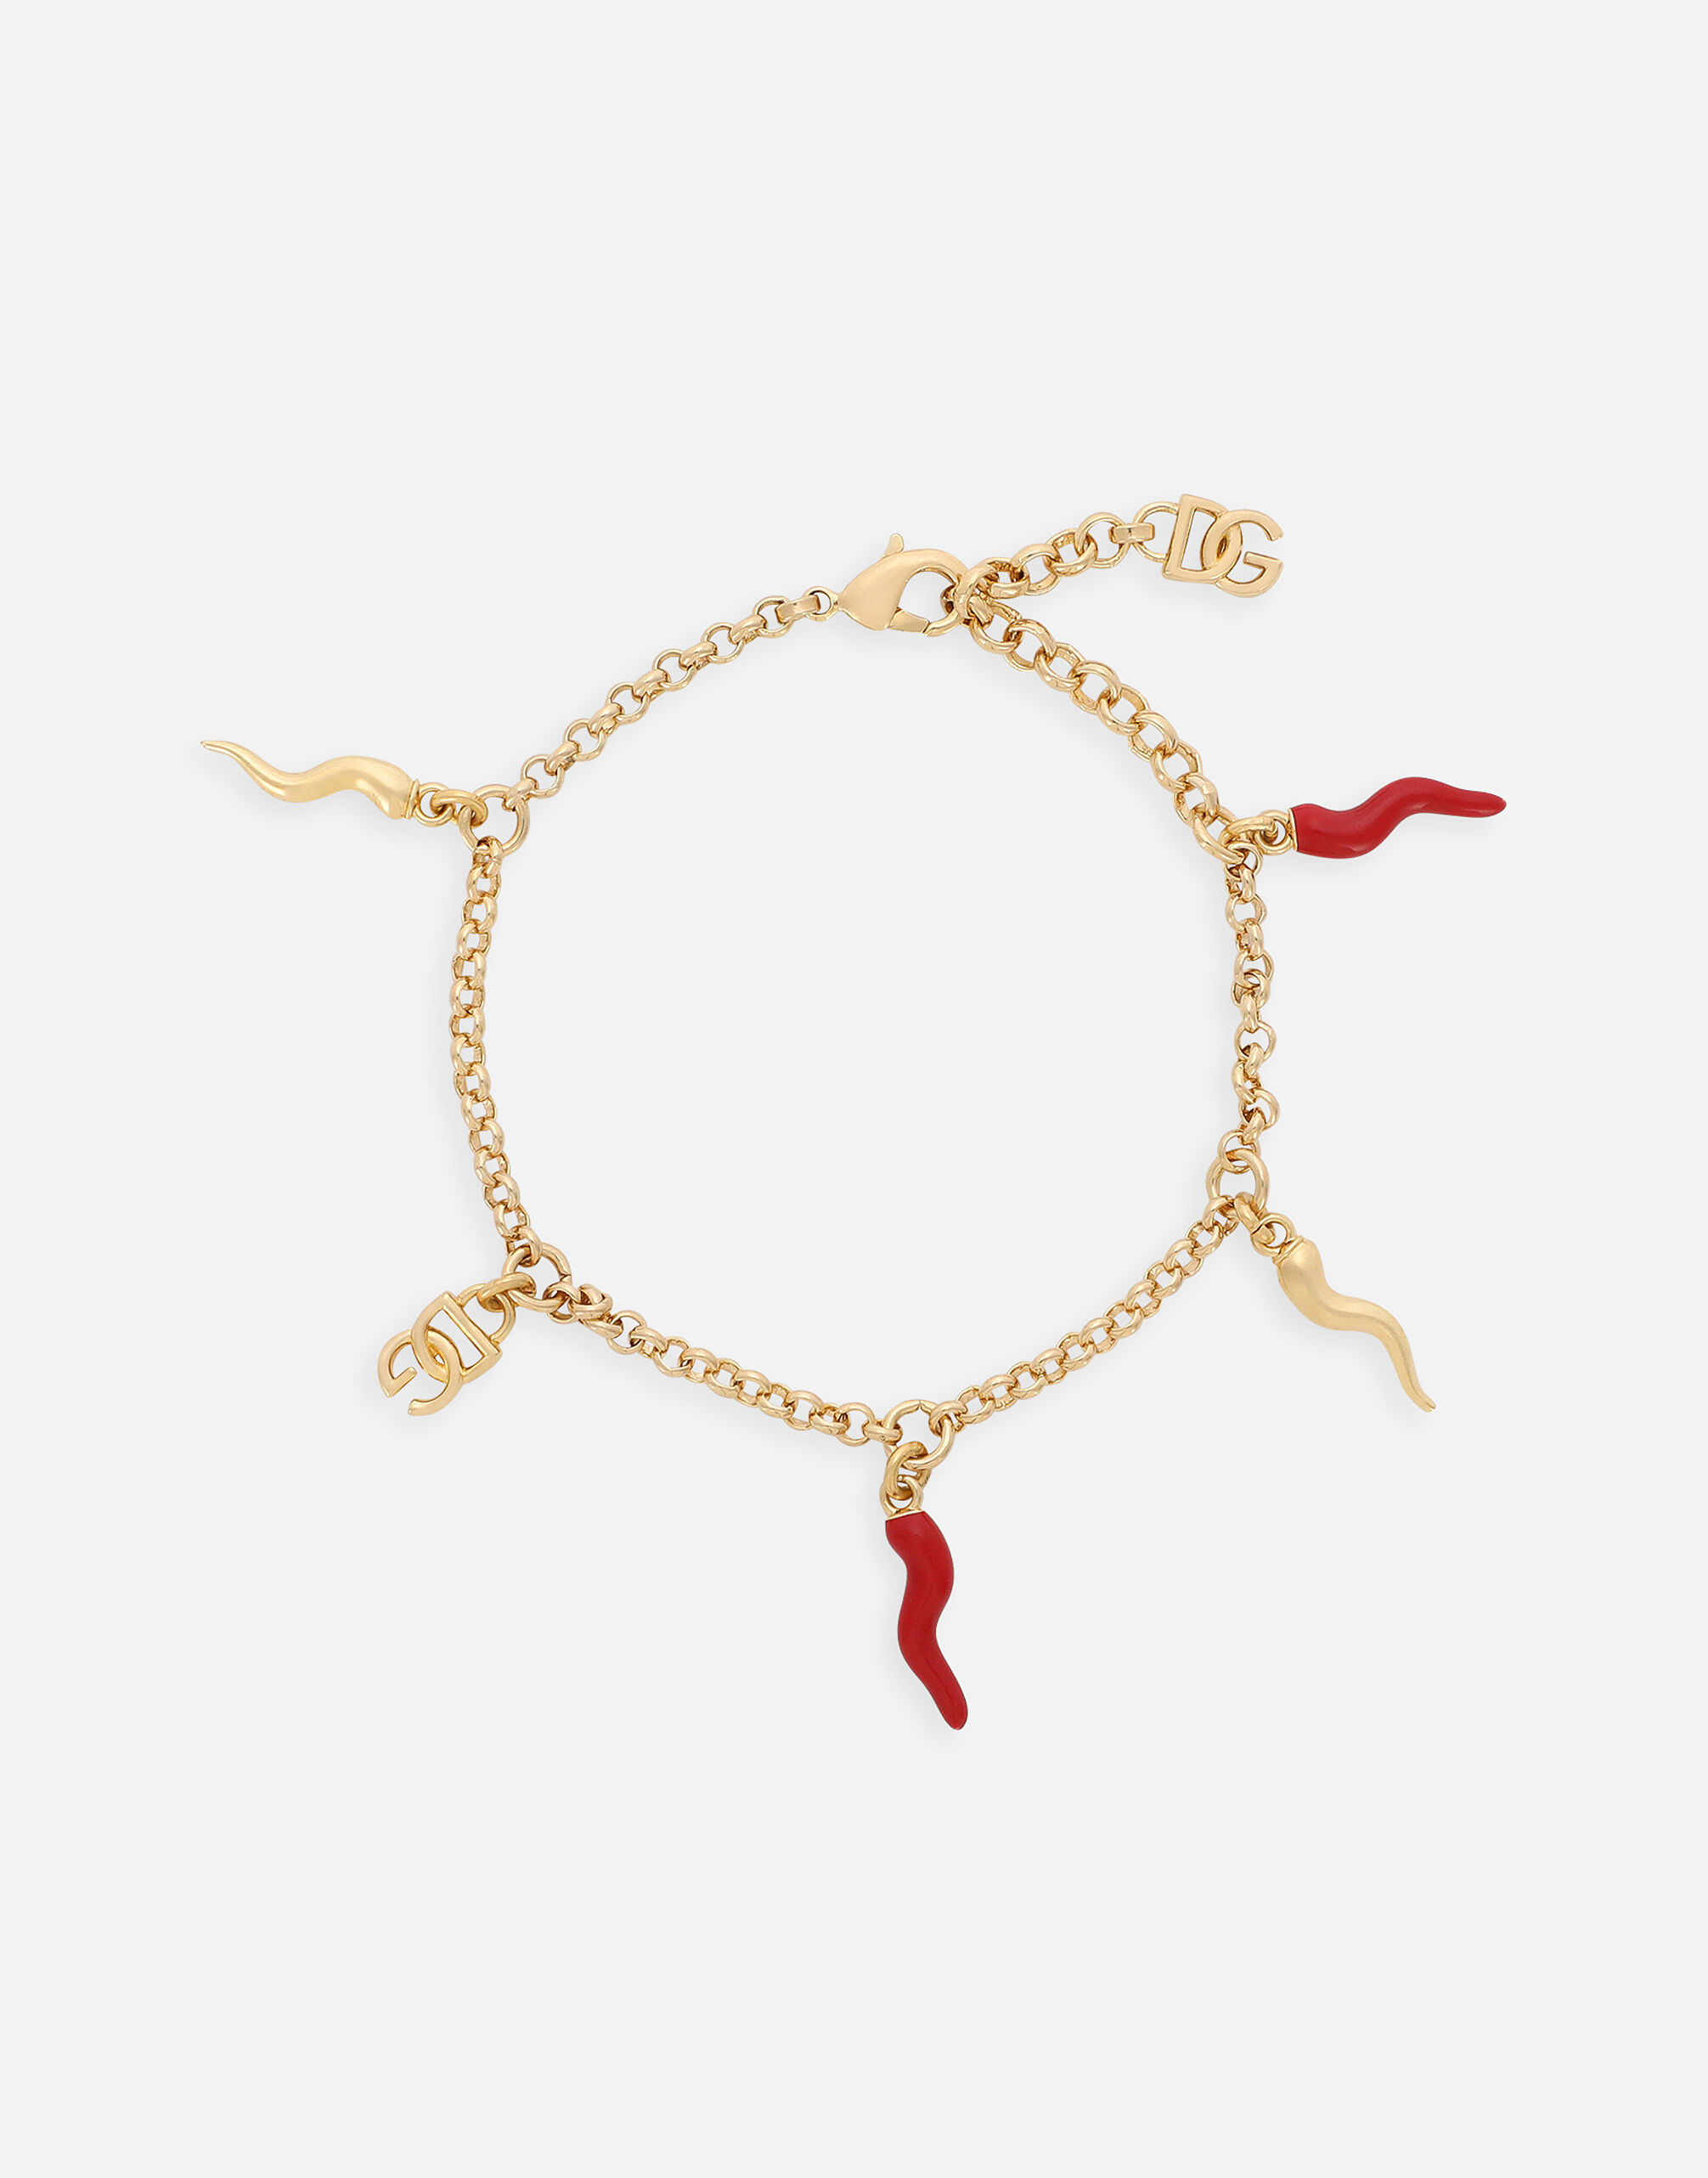 ${brand} Bracelet with DG logo and multiple horn charms ${colorDescription} ${masterID}